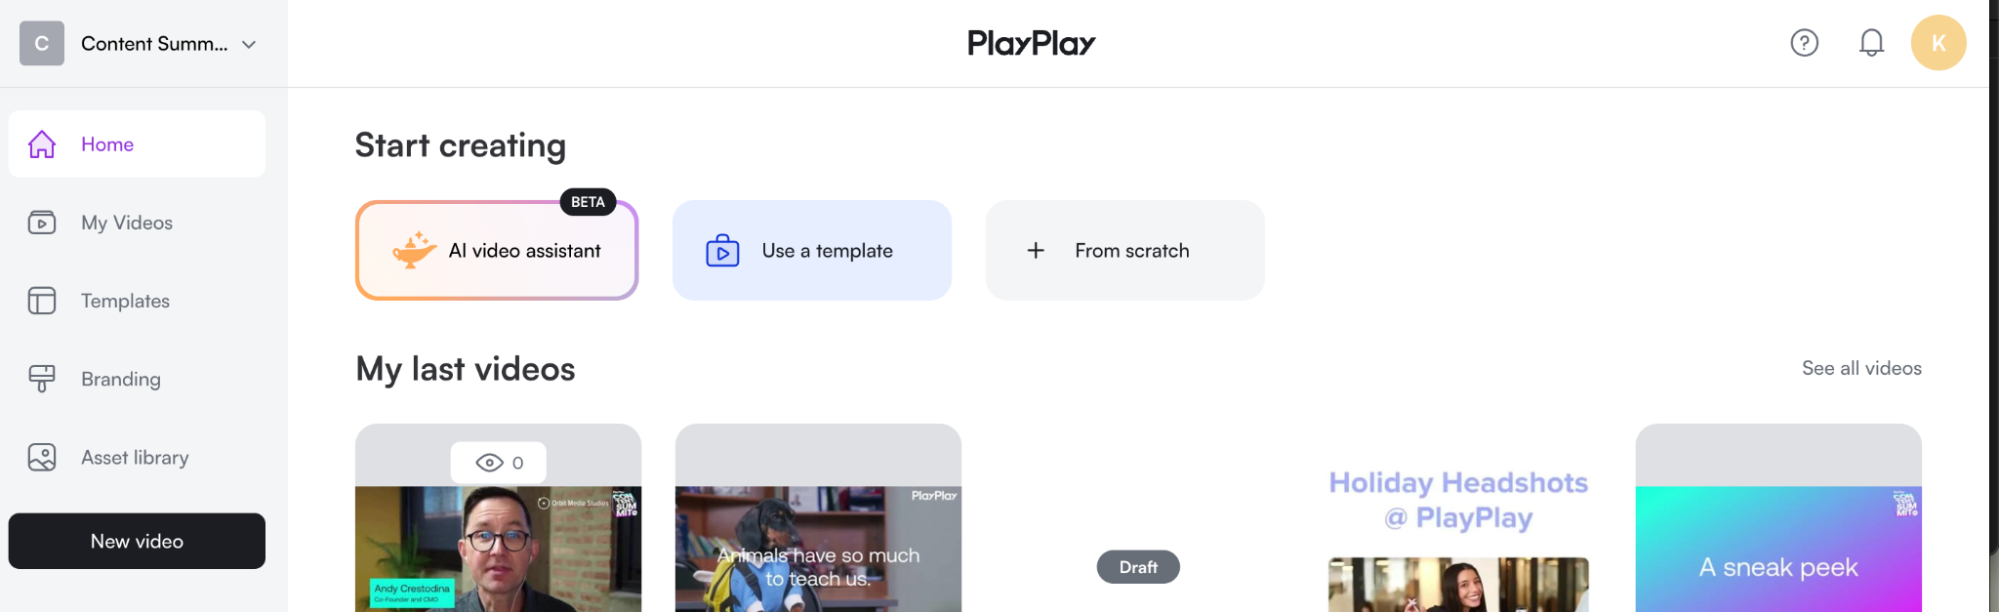 Log into your PlayPlay account